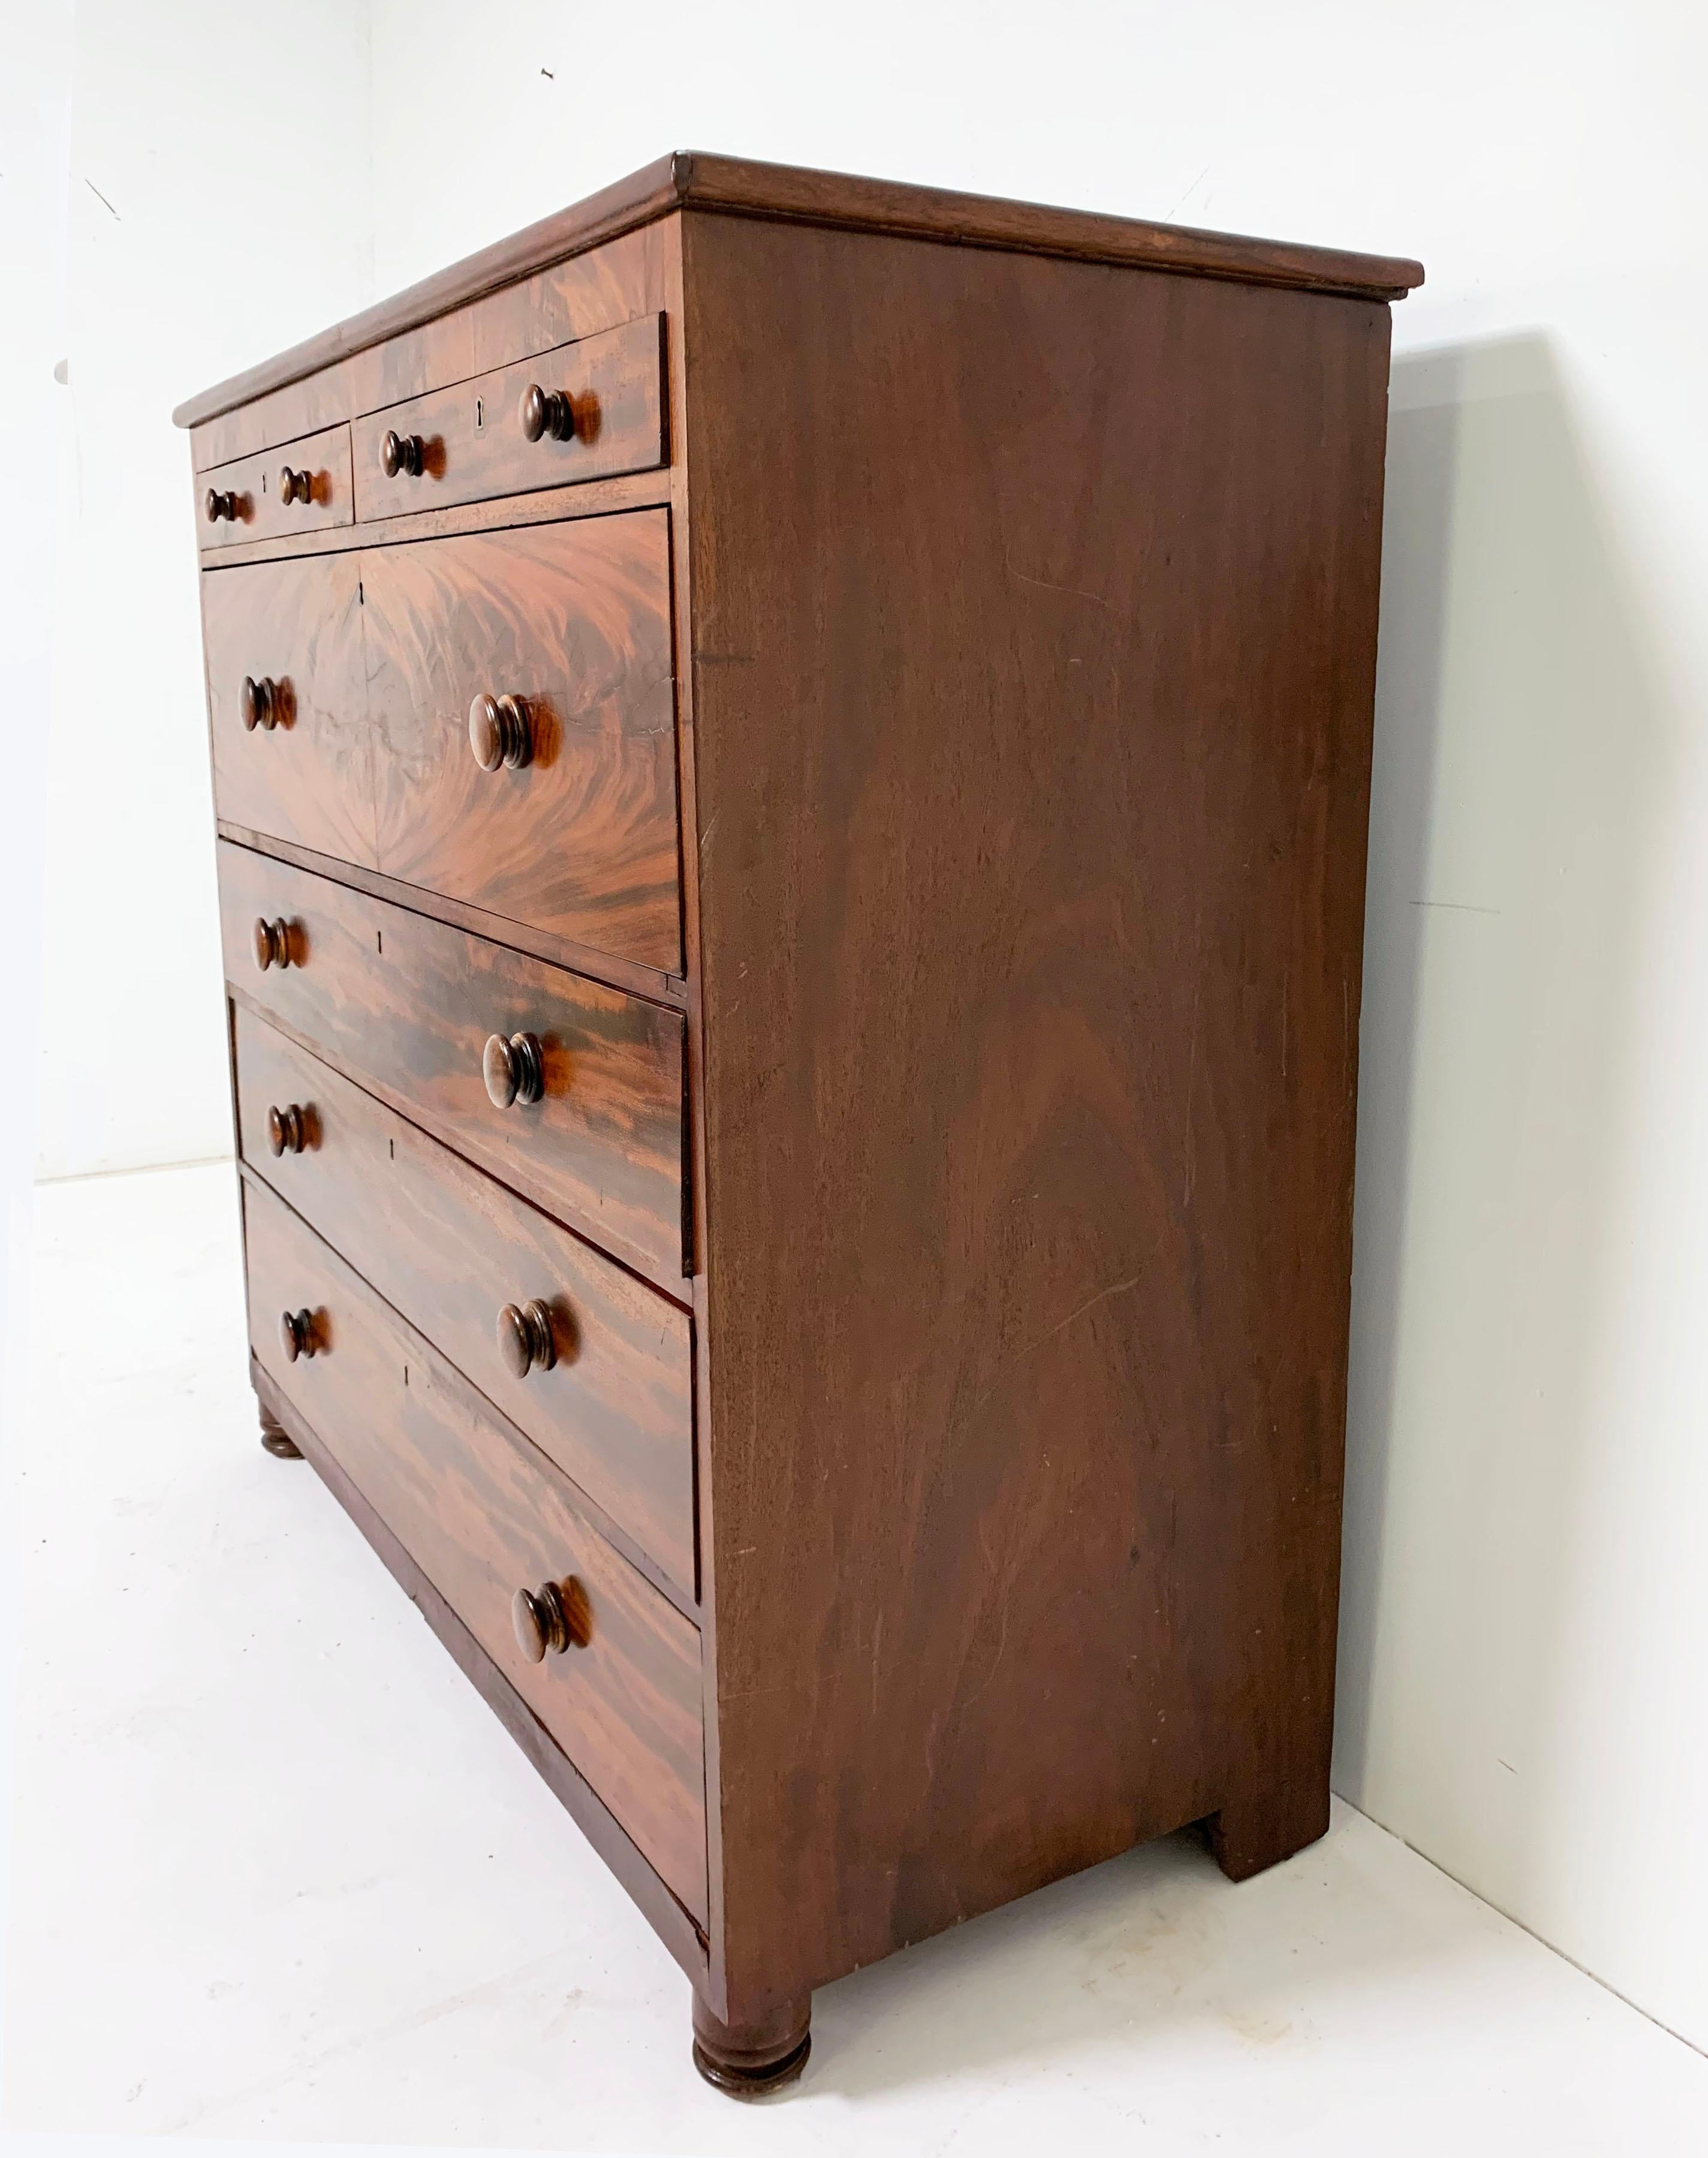 An unusually broad shouldered flamed mahogany dressing chest, early 19th century, likely built just at the cusp of the Federal and Empire periods.